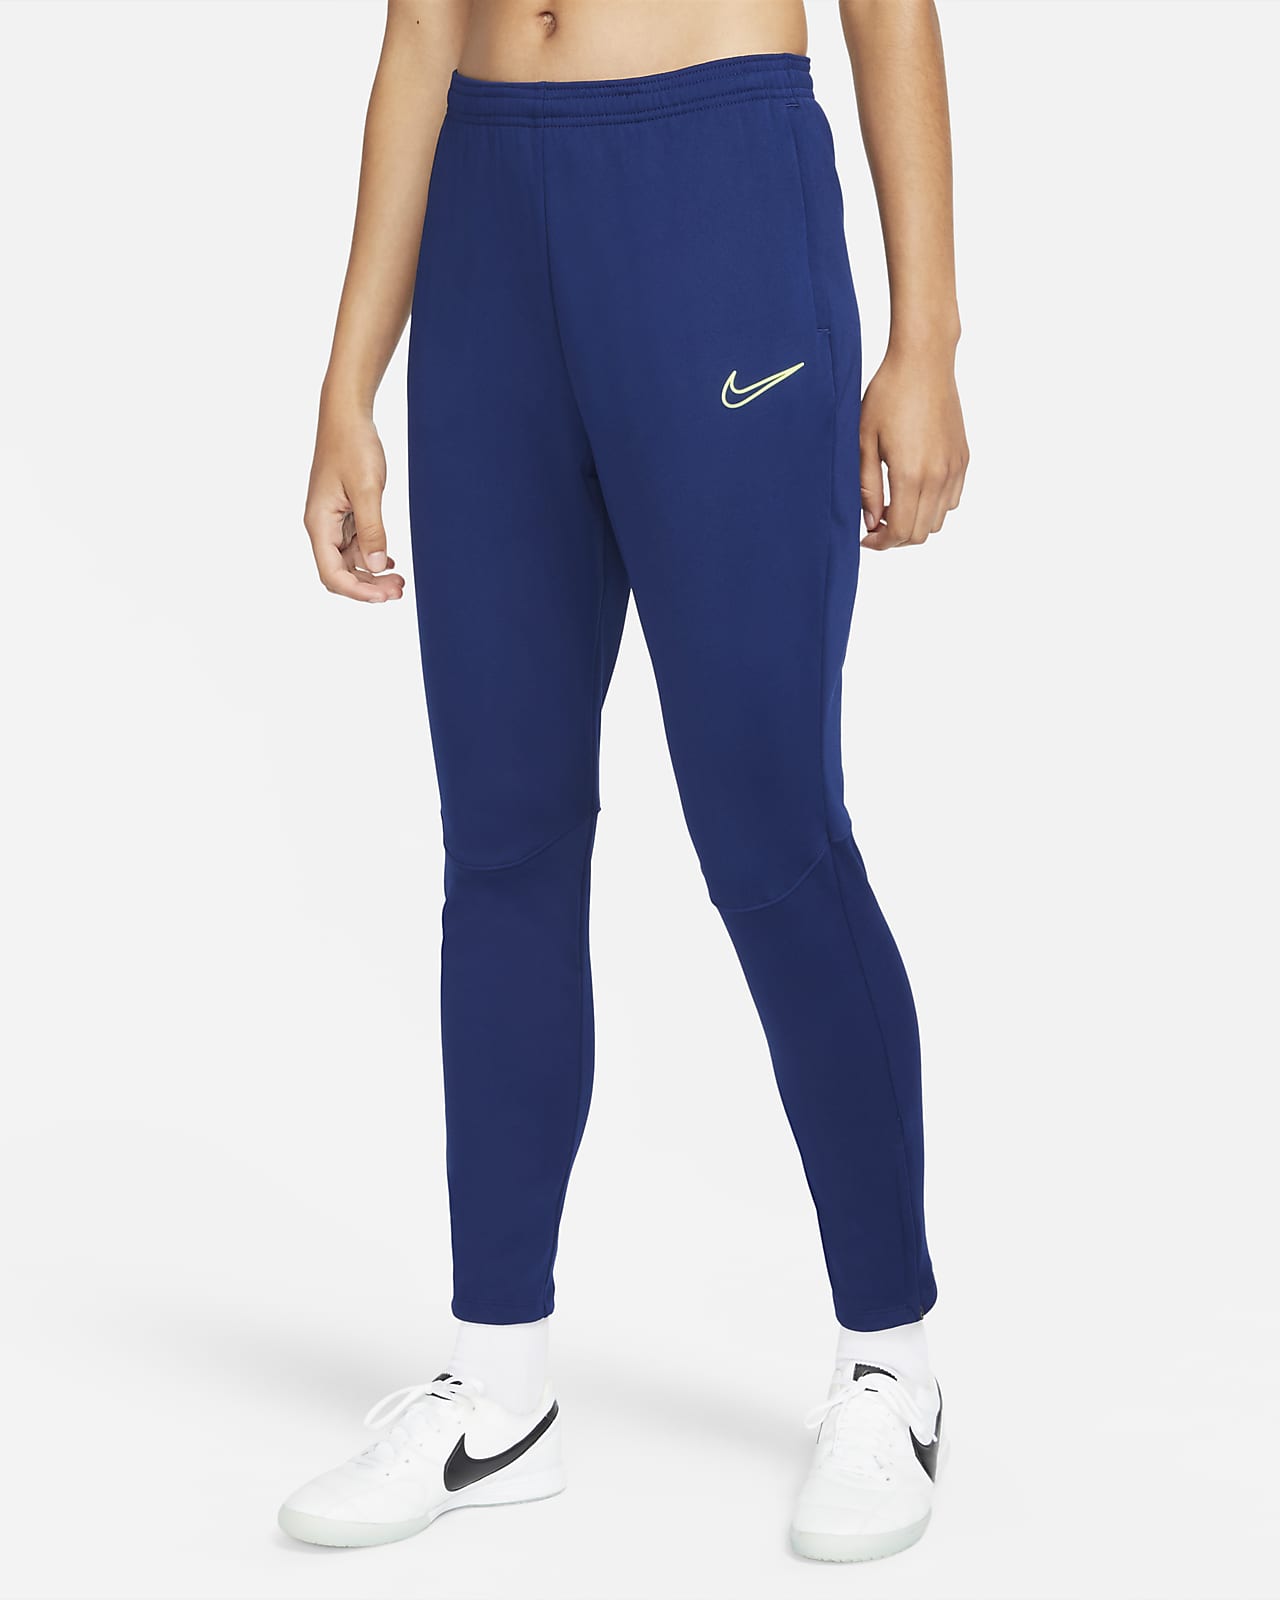 Nike Therma-FIT Academy Winter Warrior Women's Knit Football Pants